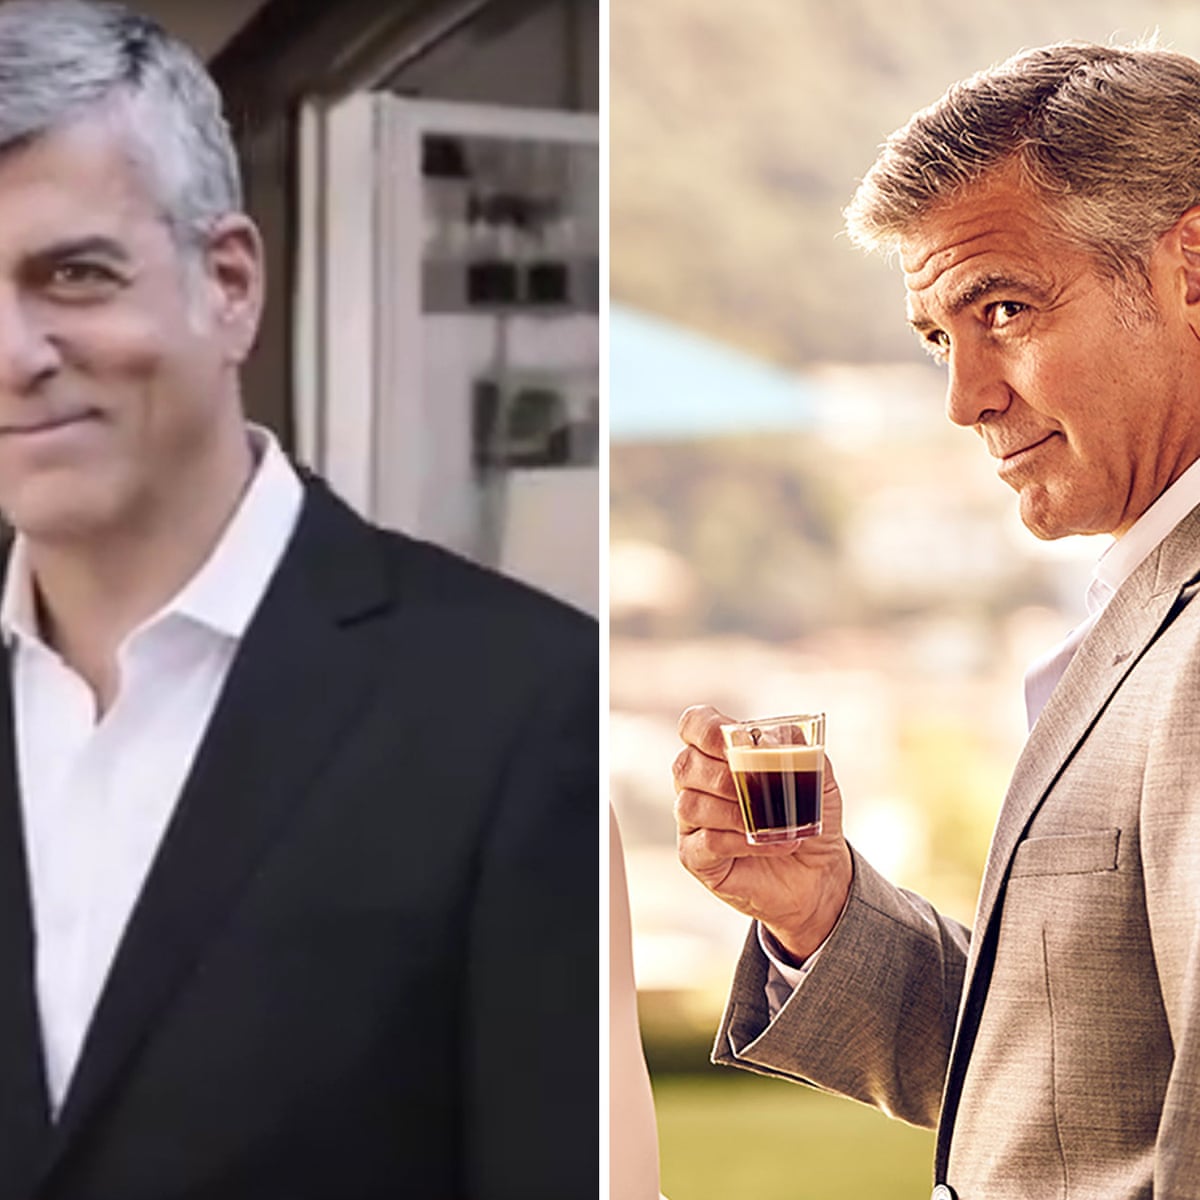 How a fake George Clooney sparked caffeinated legal row | | The Guardian